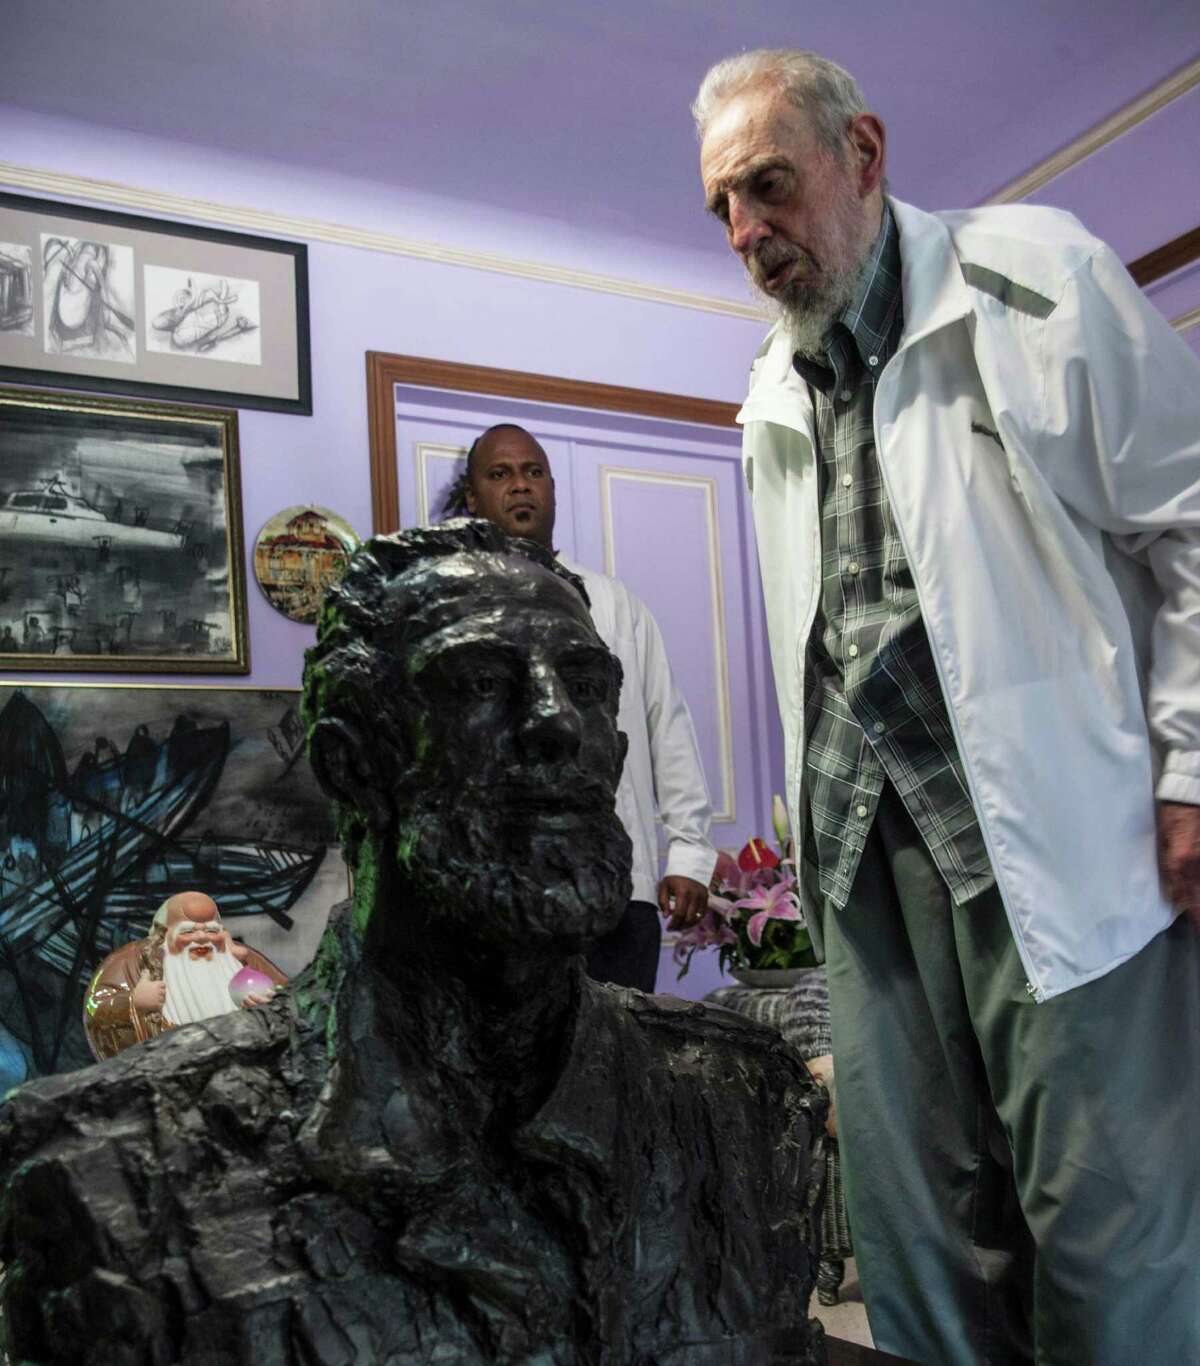 Cuba's Fidel Castro looks at a sculpture of himself, a gift from China's President Xi Jinping in Havana, Cuba, Tuesday, July 22, 2014. Xi Jinping said that his state visit to Cuba is aimed at carrying forward the traditional friendship between the two countries jointly built by Castro and the older generations of Chinese leaders. He also extended good wishes to Castro for his upcoming 88th birthday. (AP Photo/Alex Castro)